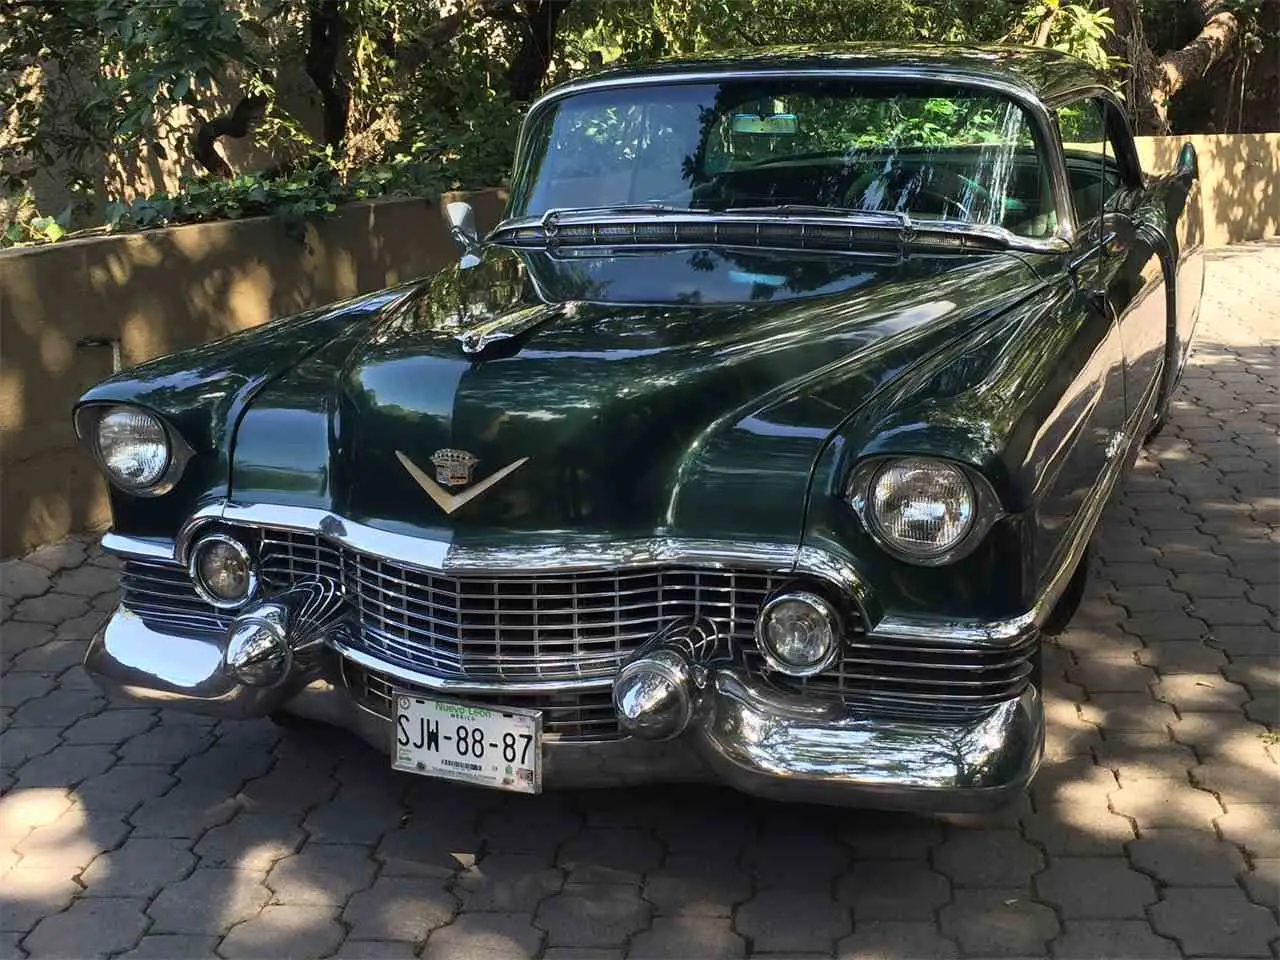 The History and Features of the Iconic 1954 Cadillac Coupe DeVille